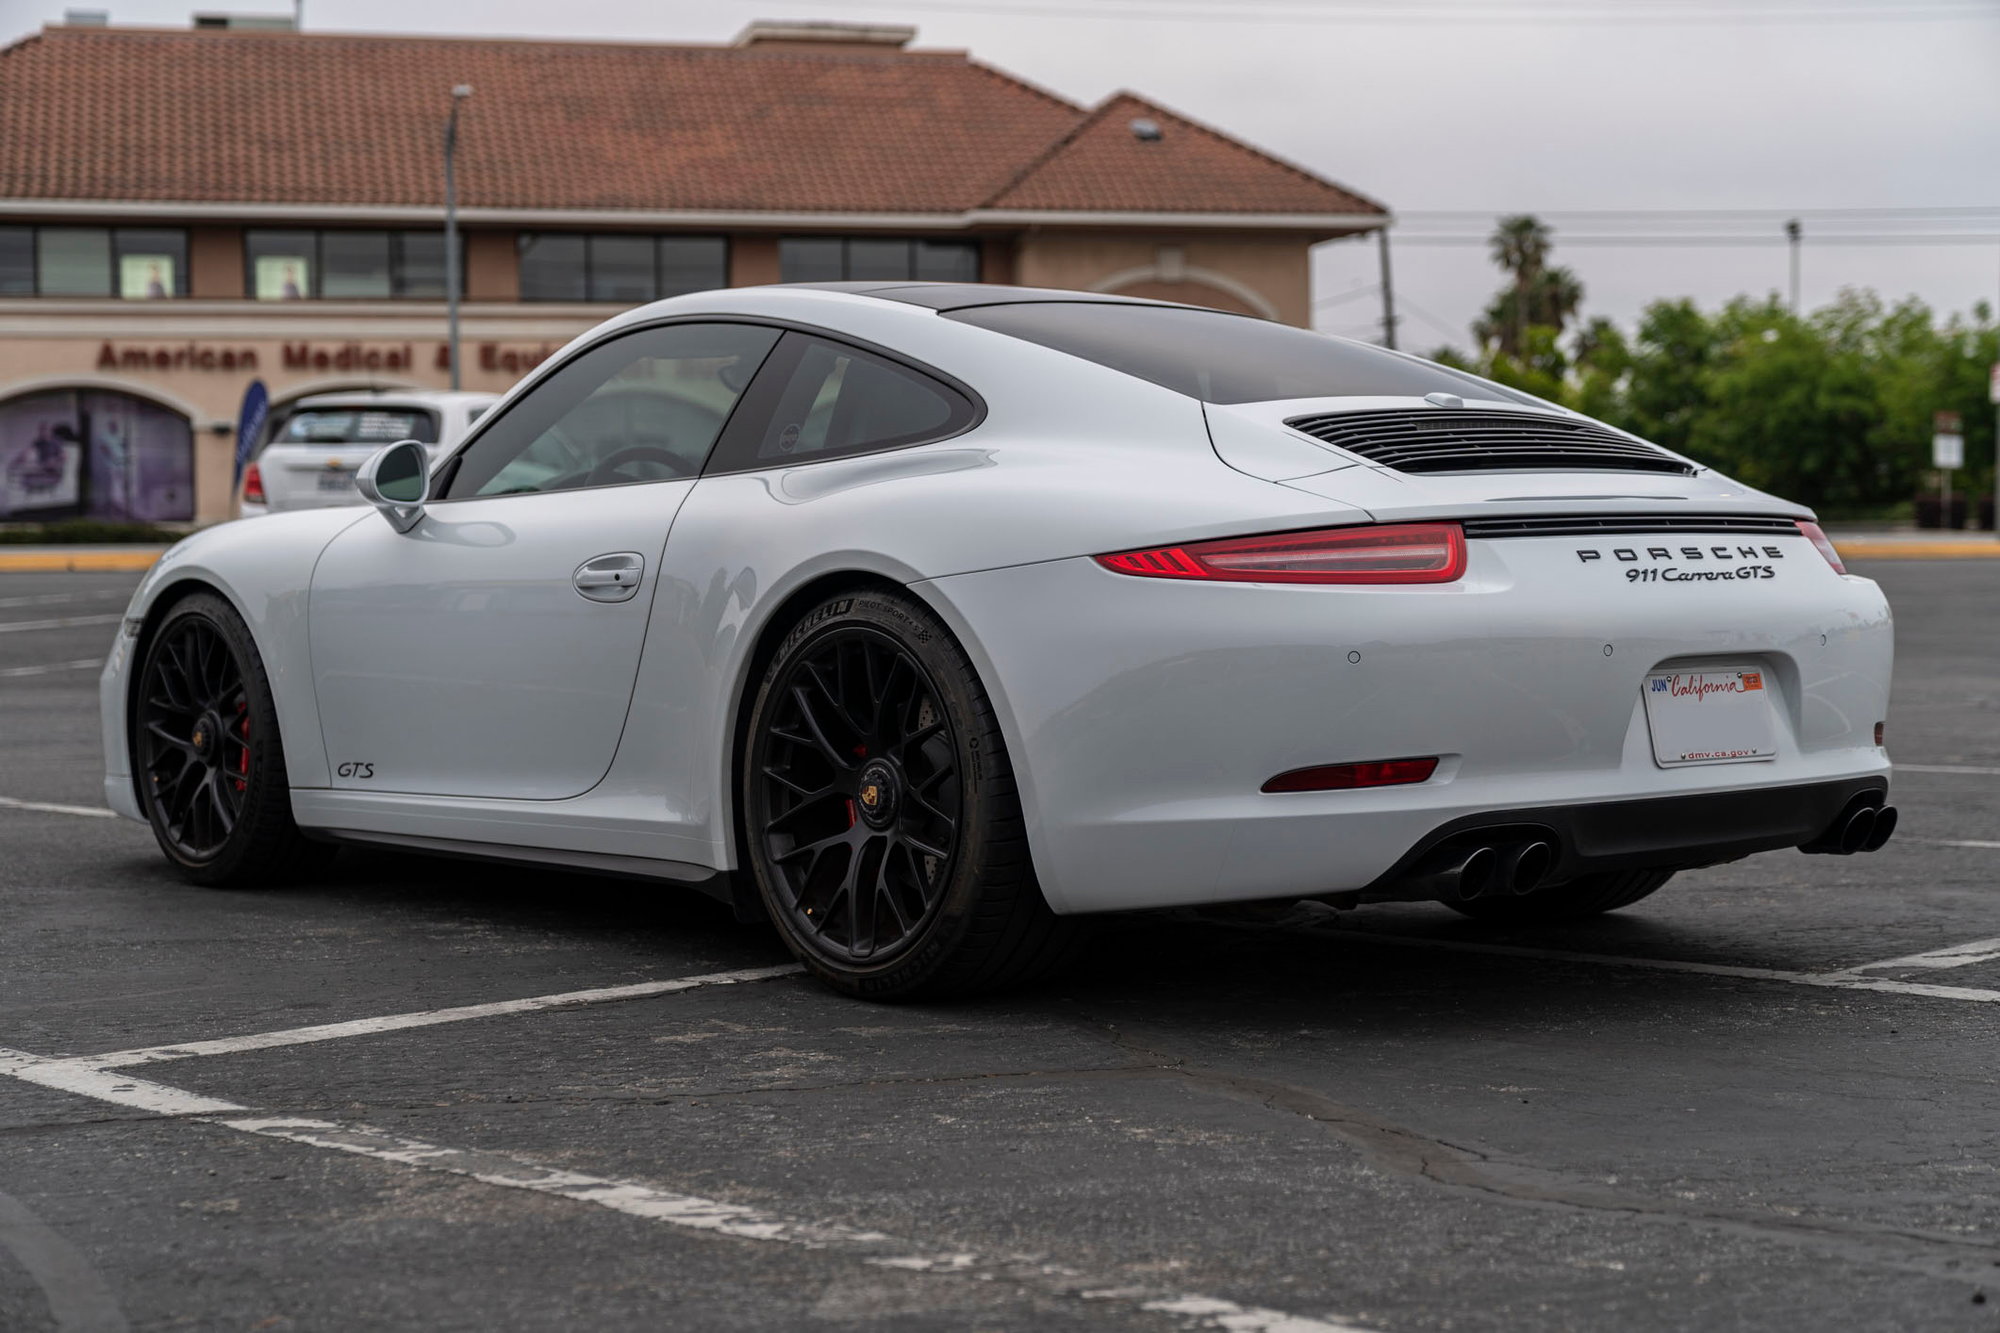 2015 Porsche 911 - 2015 911 GTS-25,084 miles, stunning car!!!  $115,000 OBO - Used - VIN WP0AB2A91FS124430 - 6 cyl - 2WD - Automatic - Coupe - White - San Jose, CA 95124, United States